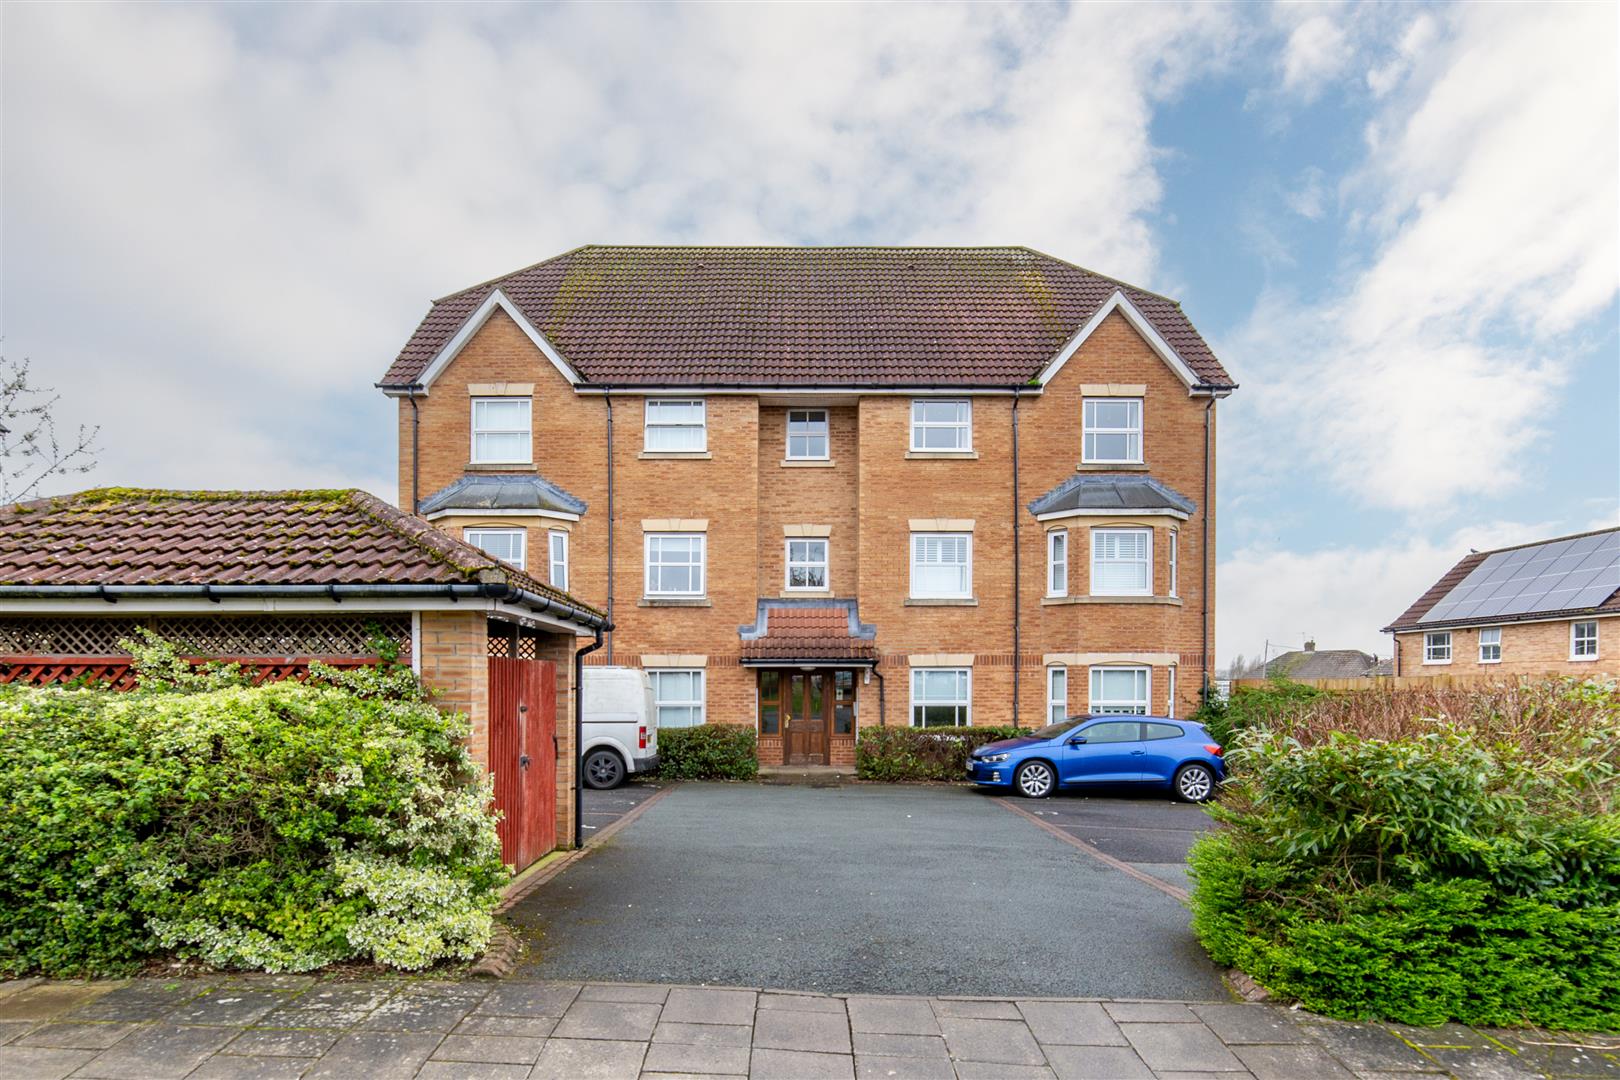 2 bed apartment for sale in Nursery Gardens, Fenham - Property Image 1